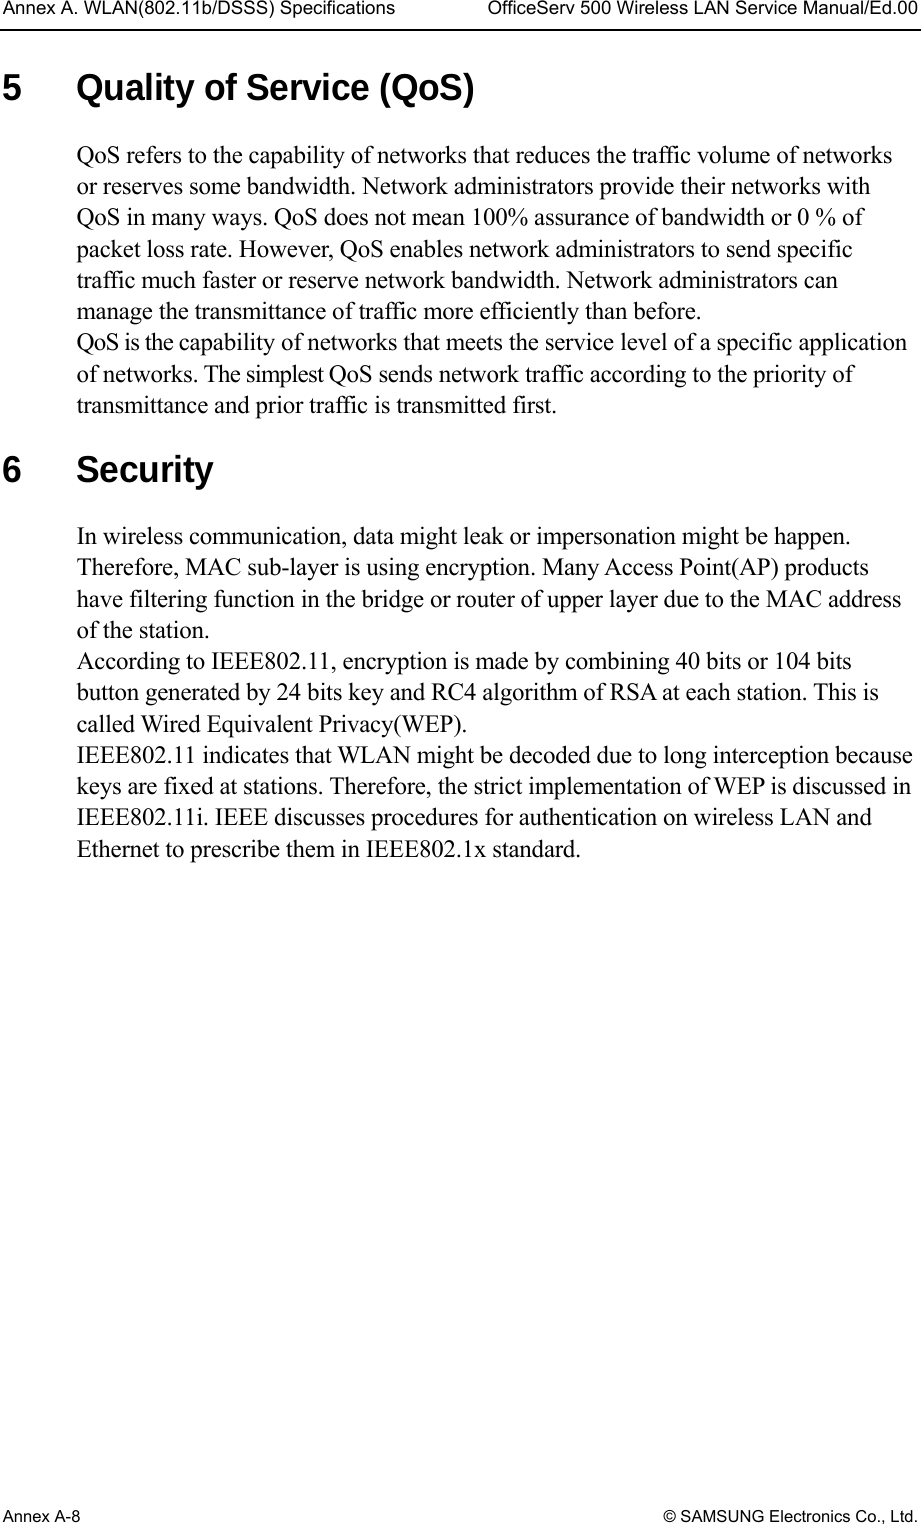 Annex A. WLAN(802.11b/DSSS) Specifications  OfficeServ 500 Wireless LAN Service Manual/Ed.00 Annex A-8 © SAMSUNG Electronics Co., Ltd. 5  Quality of Service (QoS) QoS refers to the capability of networks that reduces the traffic volume of networks or reserves some bandwidth. Network administrators provide their networks with QoS in many ways. QoS does not mean 100% assurance of bandwidth or 0 % of packet loss rate. However, QoS enables network administrators to send specific traffic much faster or reserve network bandwidth. Network administrators can manage the transmittance of traffic more efficiently than before.   QoS is the capability of networks that meets the service level of a specific application of networks. The simplest QoS sends network traffic according to the priority of transmittance and prior traffic is transmitted first.  6 Security In wireless communication, data might leak or impersonation might be happen. Therefore, MAC sub-layer is using encryption. Many Access Point(AP) products have filtering function in the bridge or router of upper layer due to the MAC address of the station.   According to IEEE802.11, encryption is made by combining 40 bits or 104 bits button generated by 24 bits key and RC4 algorithm of RSA at each station. This is called Wired Equivalent Privacy(WEP). IEEE802.11 indicates that WLAN might be decoded due to long interception because keys are fixed at stations. Therefore, the strict implementation of WEP is discussed in IEEE802.11i. IEEE discusses procedures for authentication on wireless LAN and Ethernet to prescribe them in IEEE802.1x standard.  